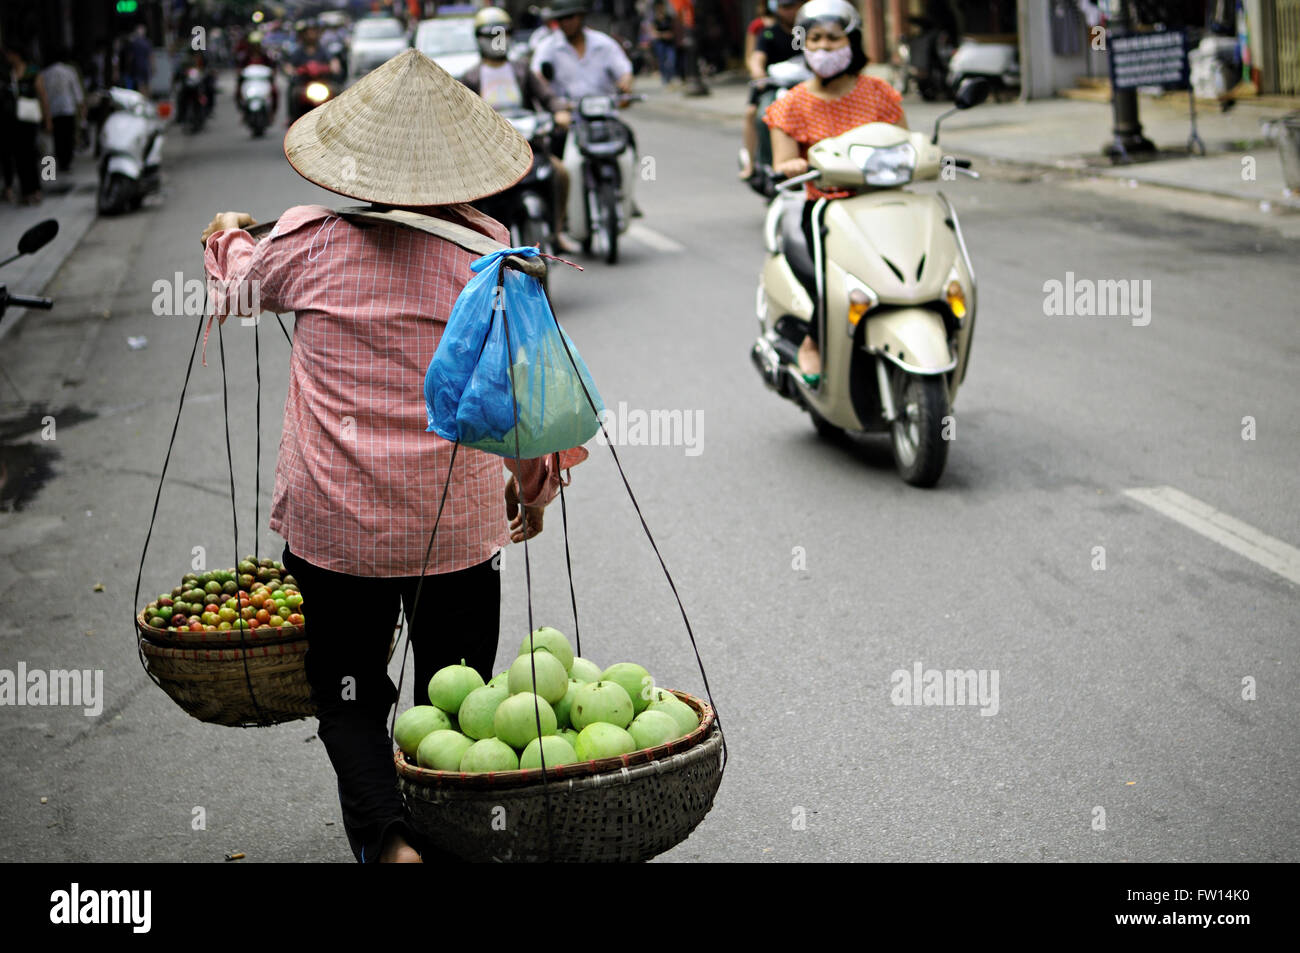 Woman street vendor with a typical conical hat walking in a street of Hanoi, Vietnam Stock Photo